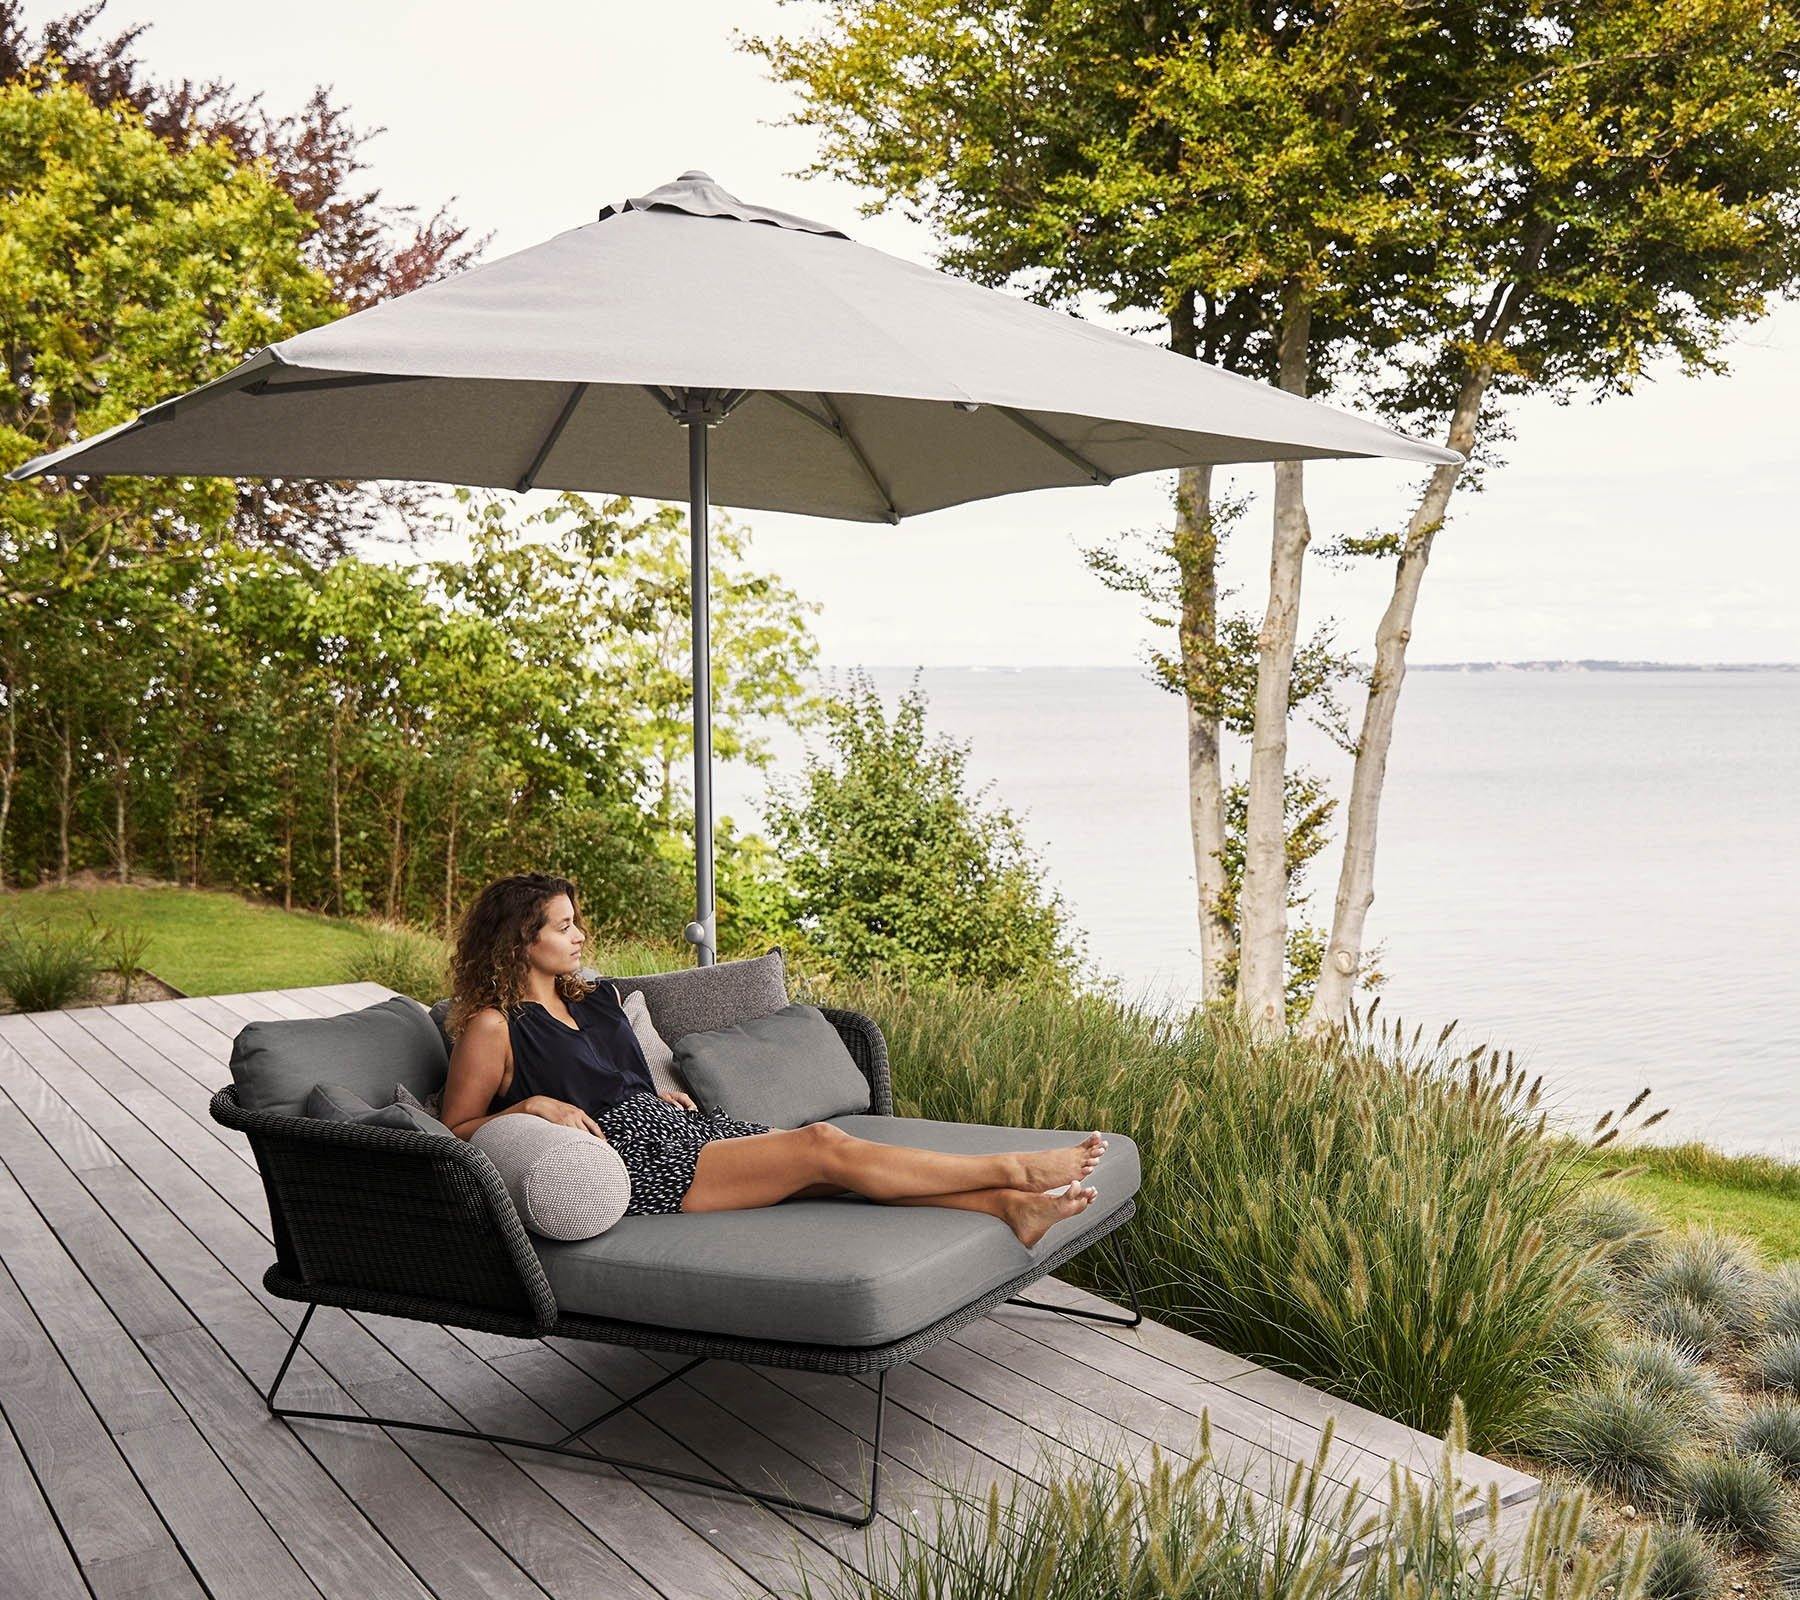 Cane-Line Denmark Outdoor Daybed Horizon daybed, incl. Cane-line Natté cushions, Cane-line Weave